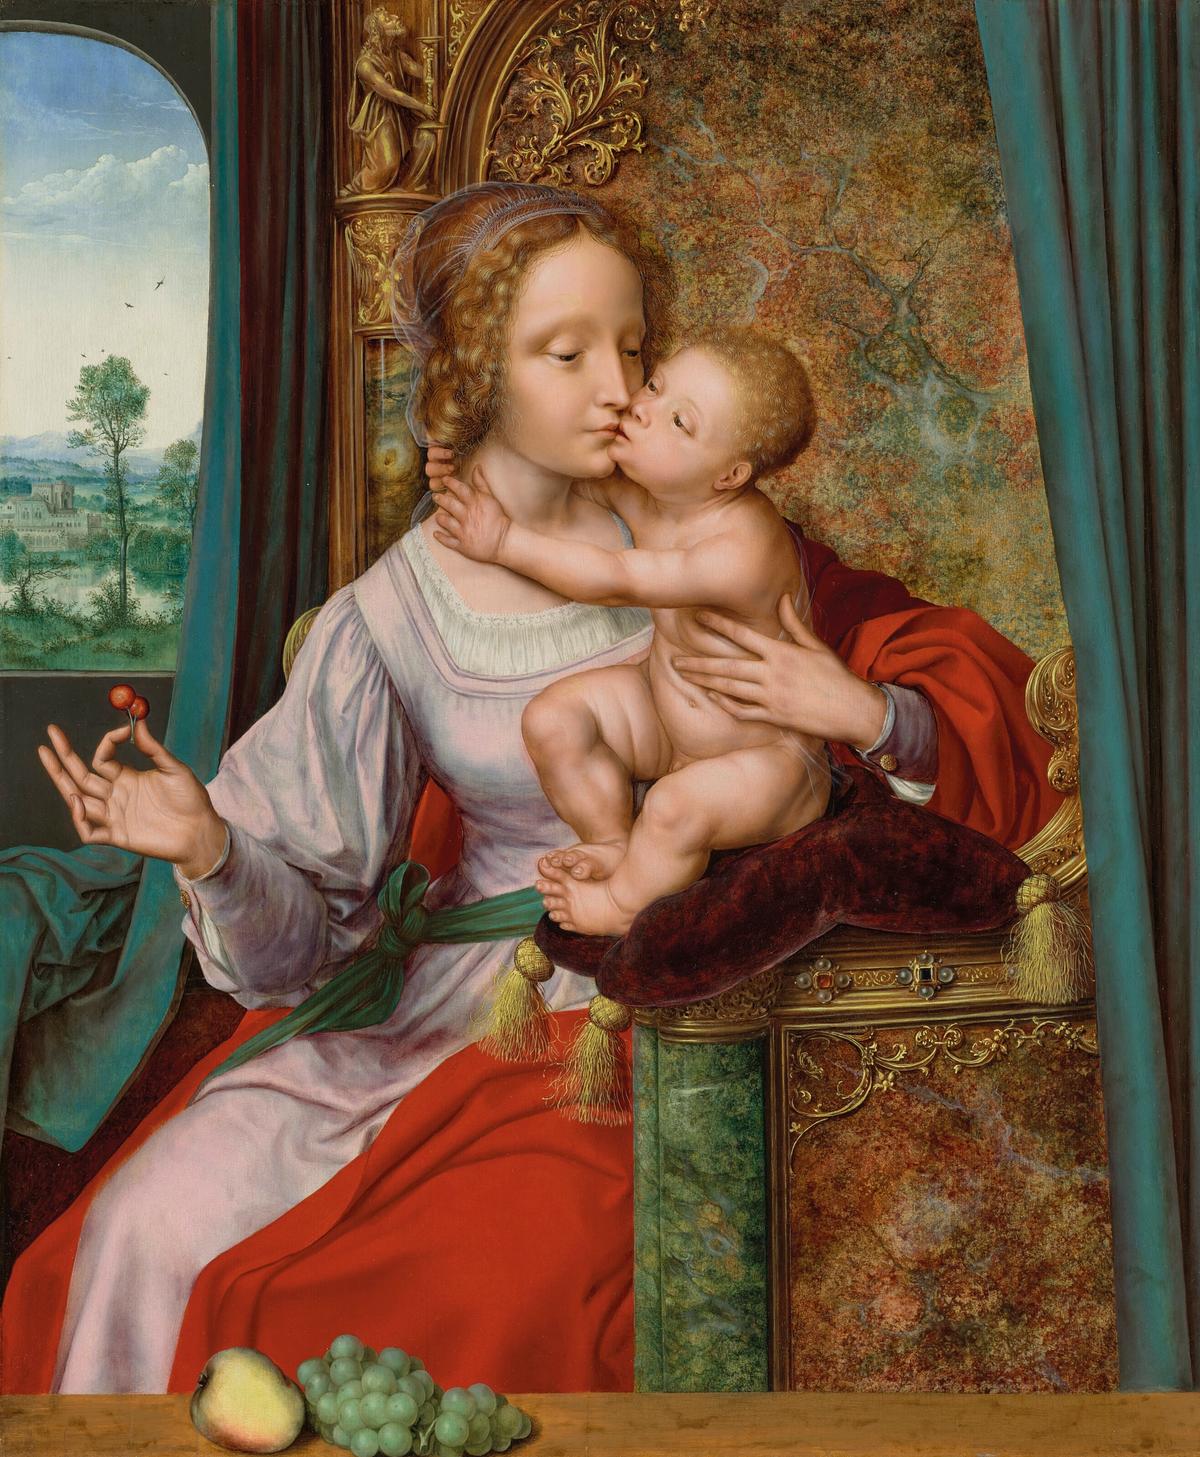 The Madonna of the Cherries disappeared in the 17th century, before reapppearing at a sale in Paris in 1920 displaying several alterations

